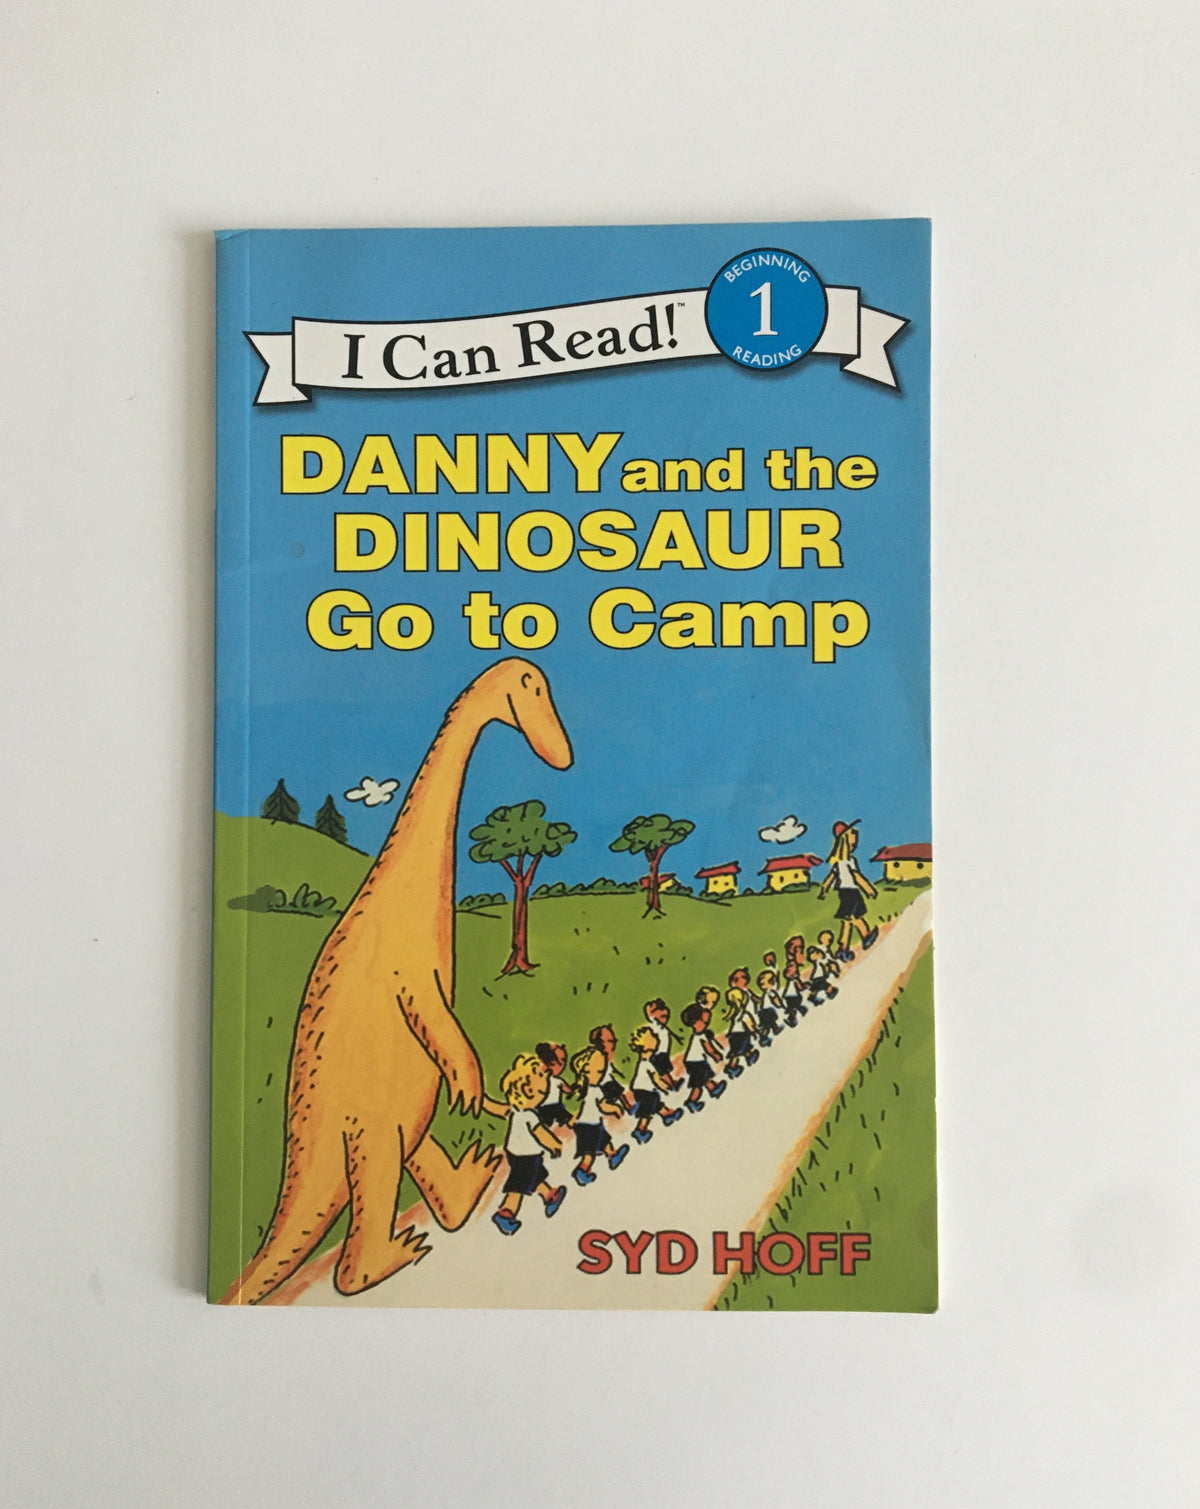 Danny and the Dinosaur Go to Camp by Sid Hoff